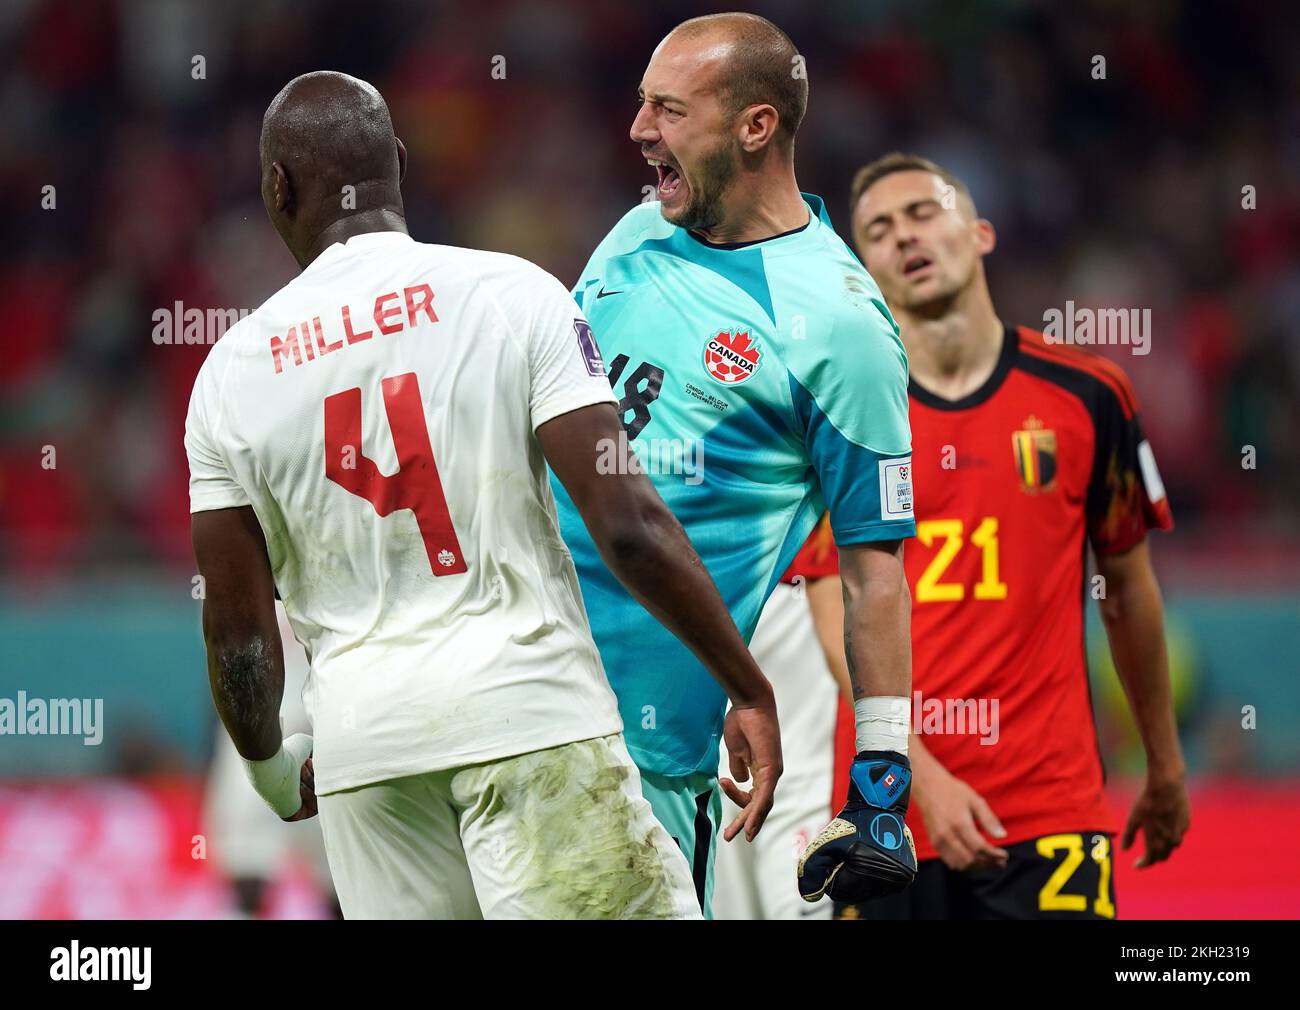 Canada goalkeeper Milan Borjan celebrates with Kamal Miller after making a tackle during the FIFA World Cup Group F match at the Ahmad bin Ali Stadium, Al Rayyan. Picture date: Wednesday November 23, 2022. Stock Photo